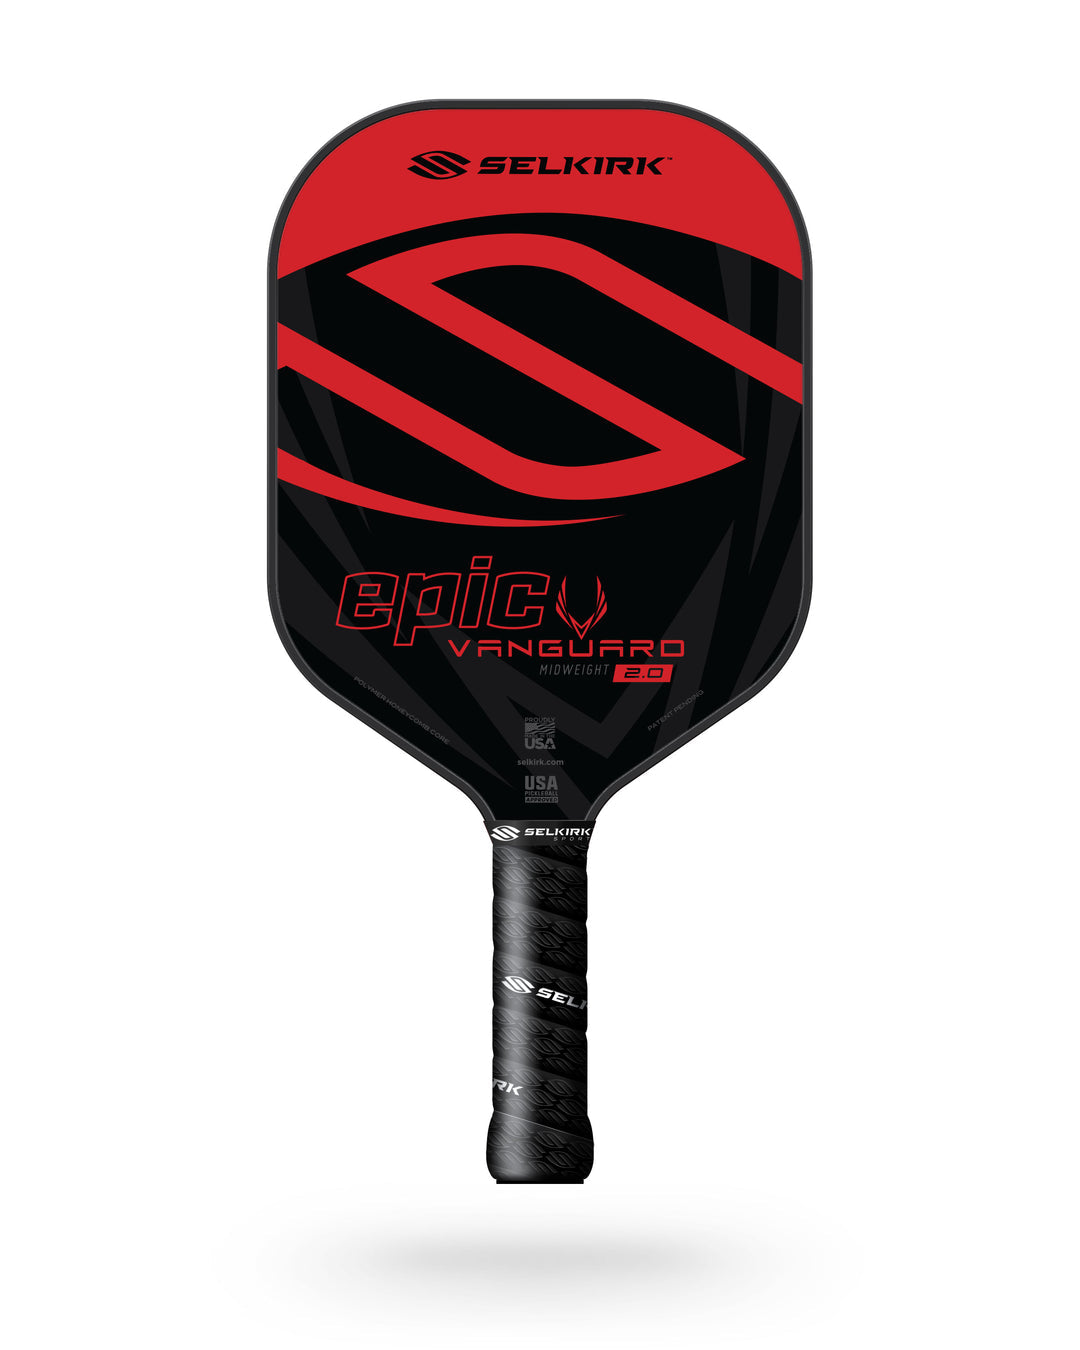 A Selkirk Vanguard Epic Pickleball Paddle in red and black on a white background.